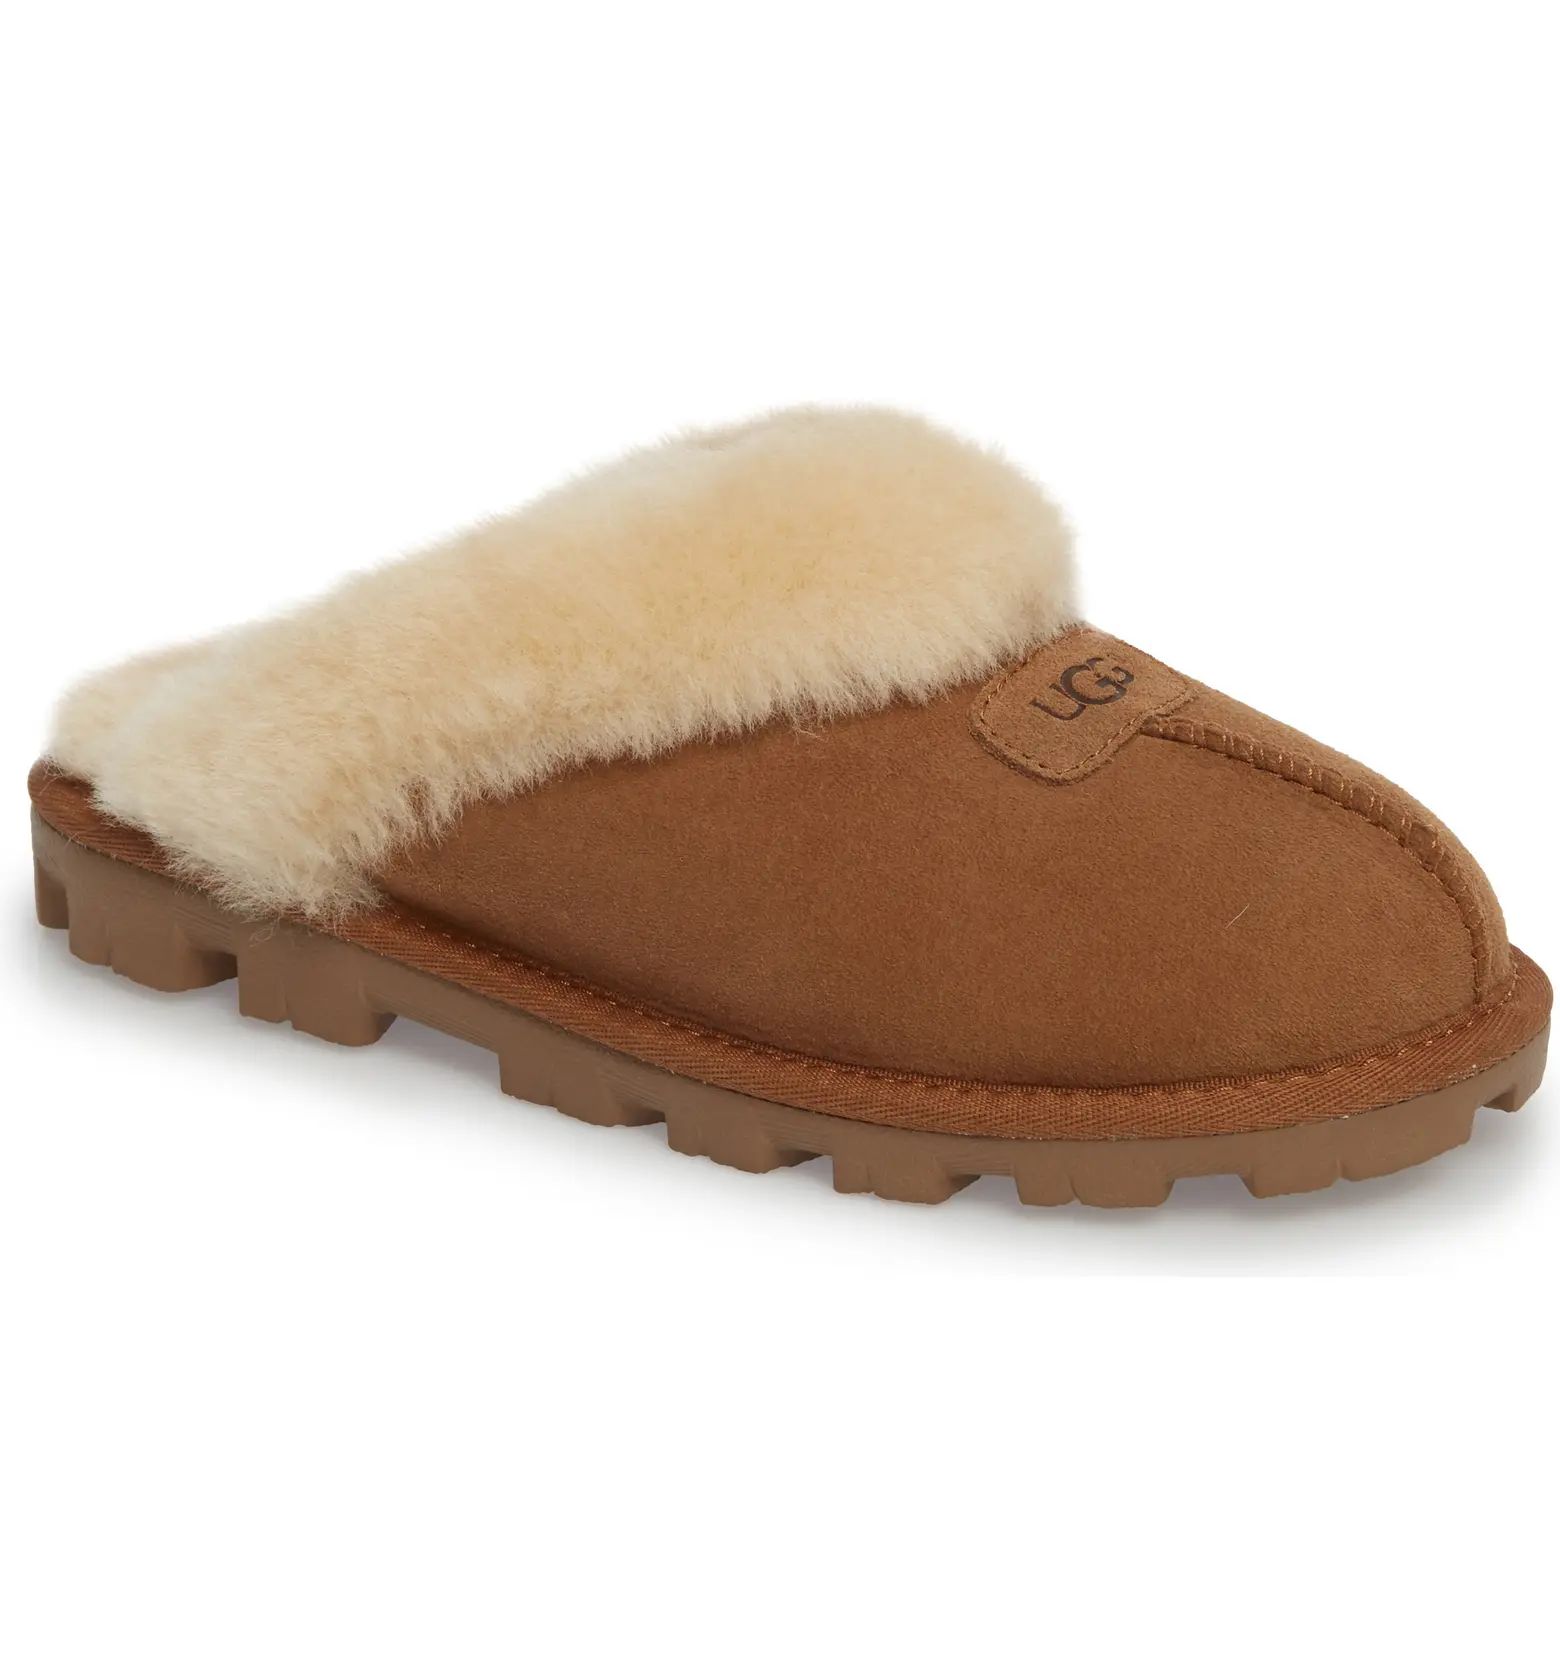 Coquette Shearling Lined Slipper (Women) | Nordstrom